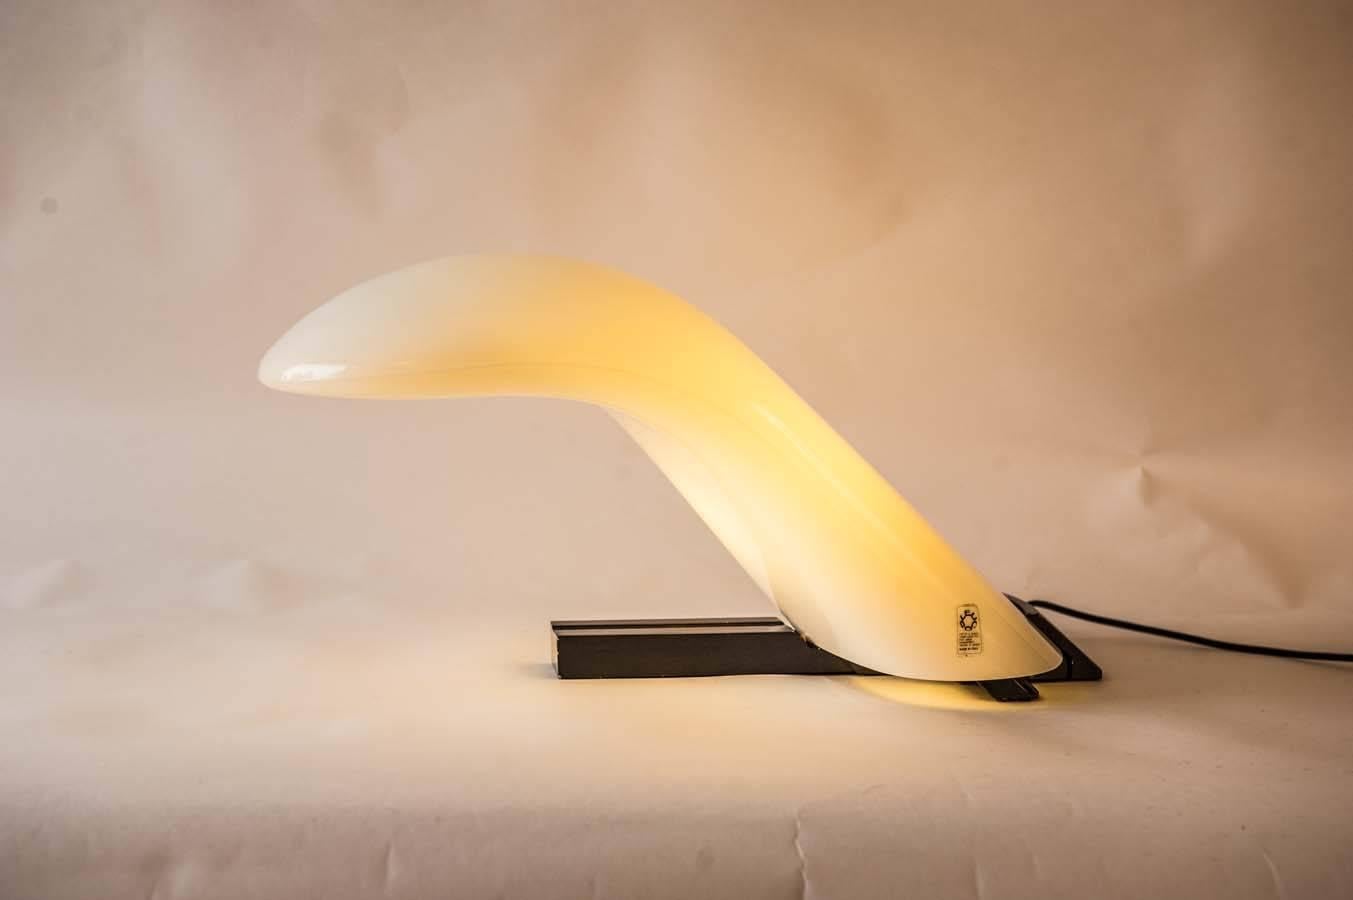 Wonderful arch shaped table or desk lamp by Italian light specialist Leucos. Its base is made of black colored steel. The light bulb itself is placed in an aerodynamically shaped Murano glass object that seems to finely seems to balance on its black